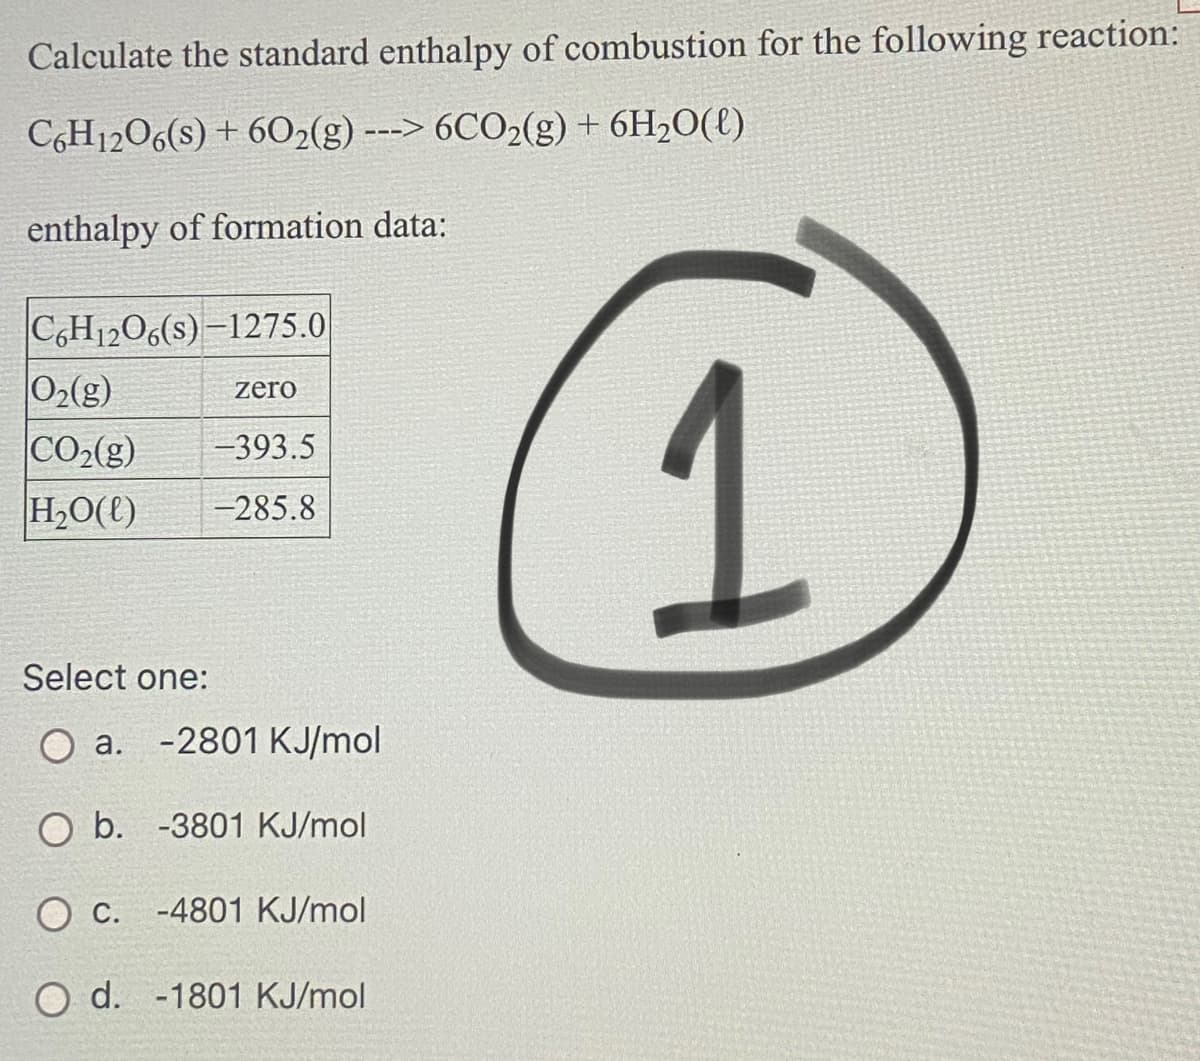 Calculate the standard enthalpy of combustion for the following reaction:
CGH1206(s) + 602(g) ---> 6CO2(g) + 6H20({)
enthalpy of formation data:
C,H1206(s) -1275.0
1
02(g)
zero
CO2(g)
H2O(t)
-393.5
-285.8
Select one:
a.
-2801 KJ/mol
O b. -3801 KJ/mol
O C. -4801 KJ/mol
O d. -1801 KJ/mol
